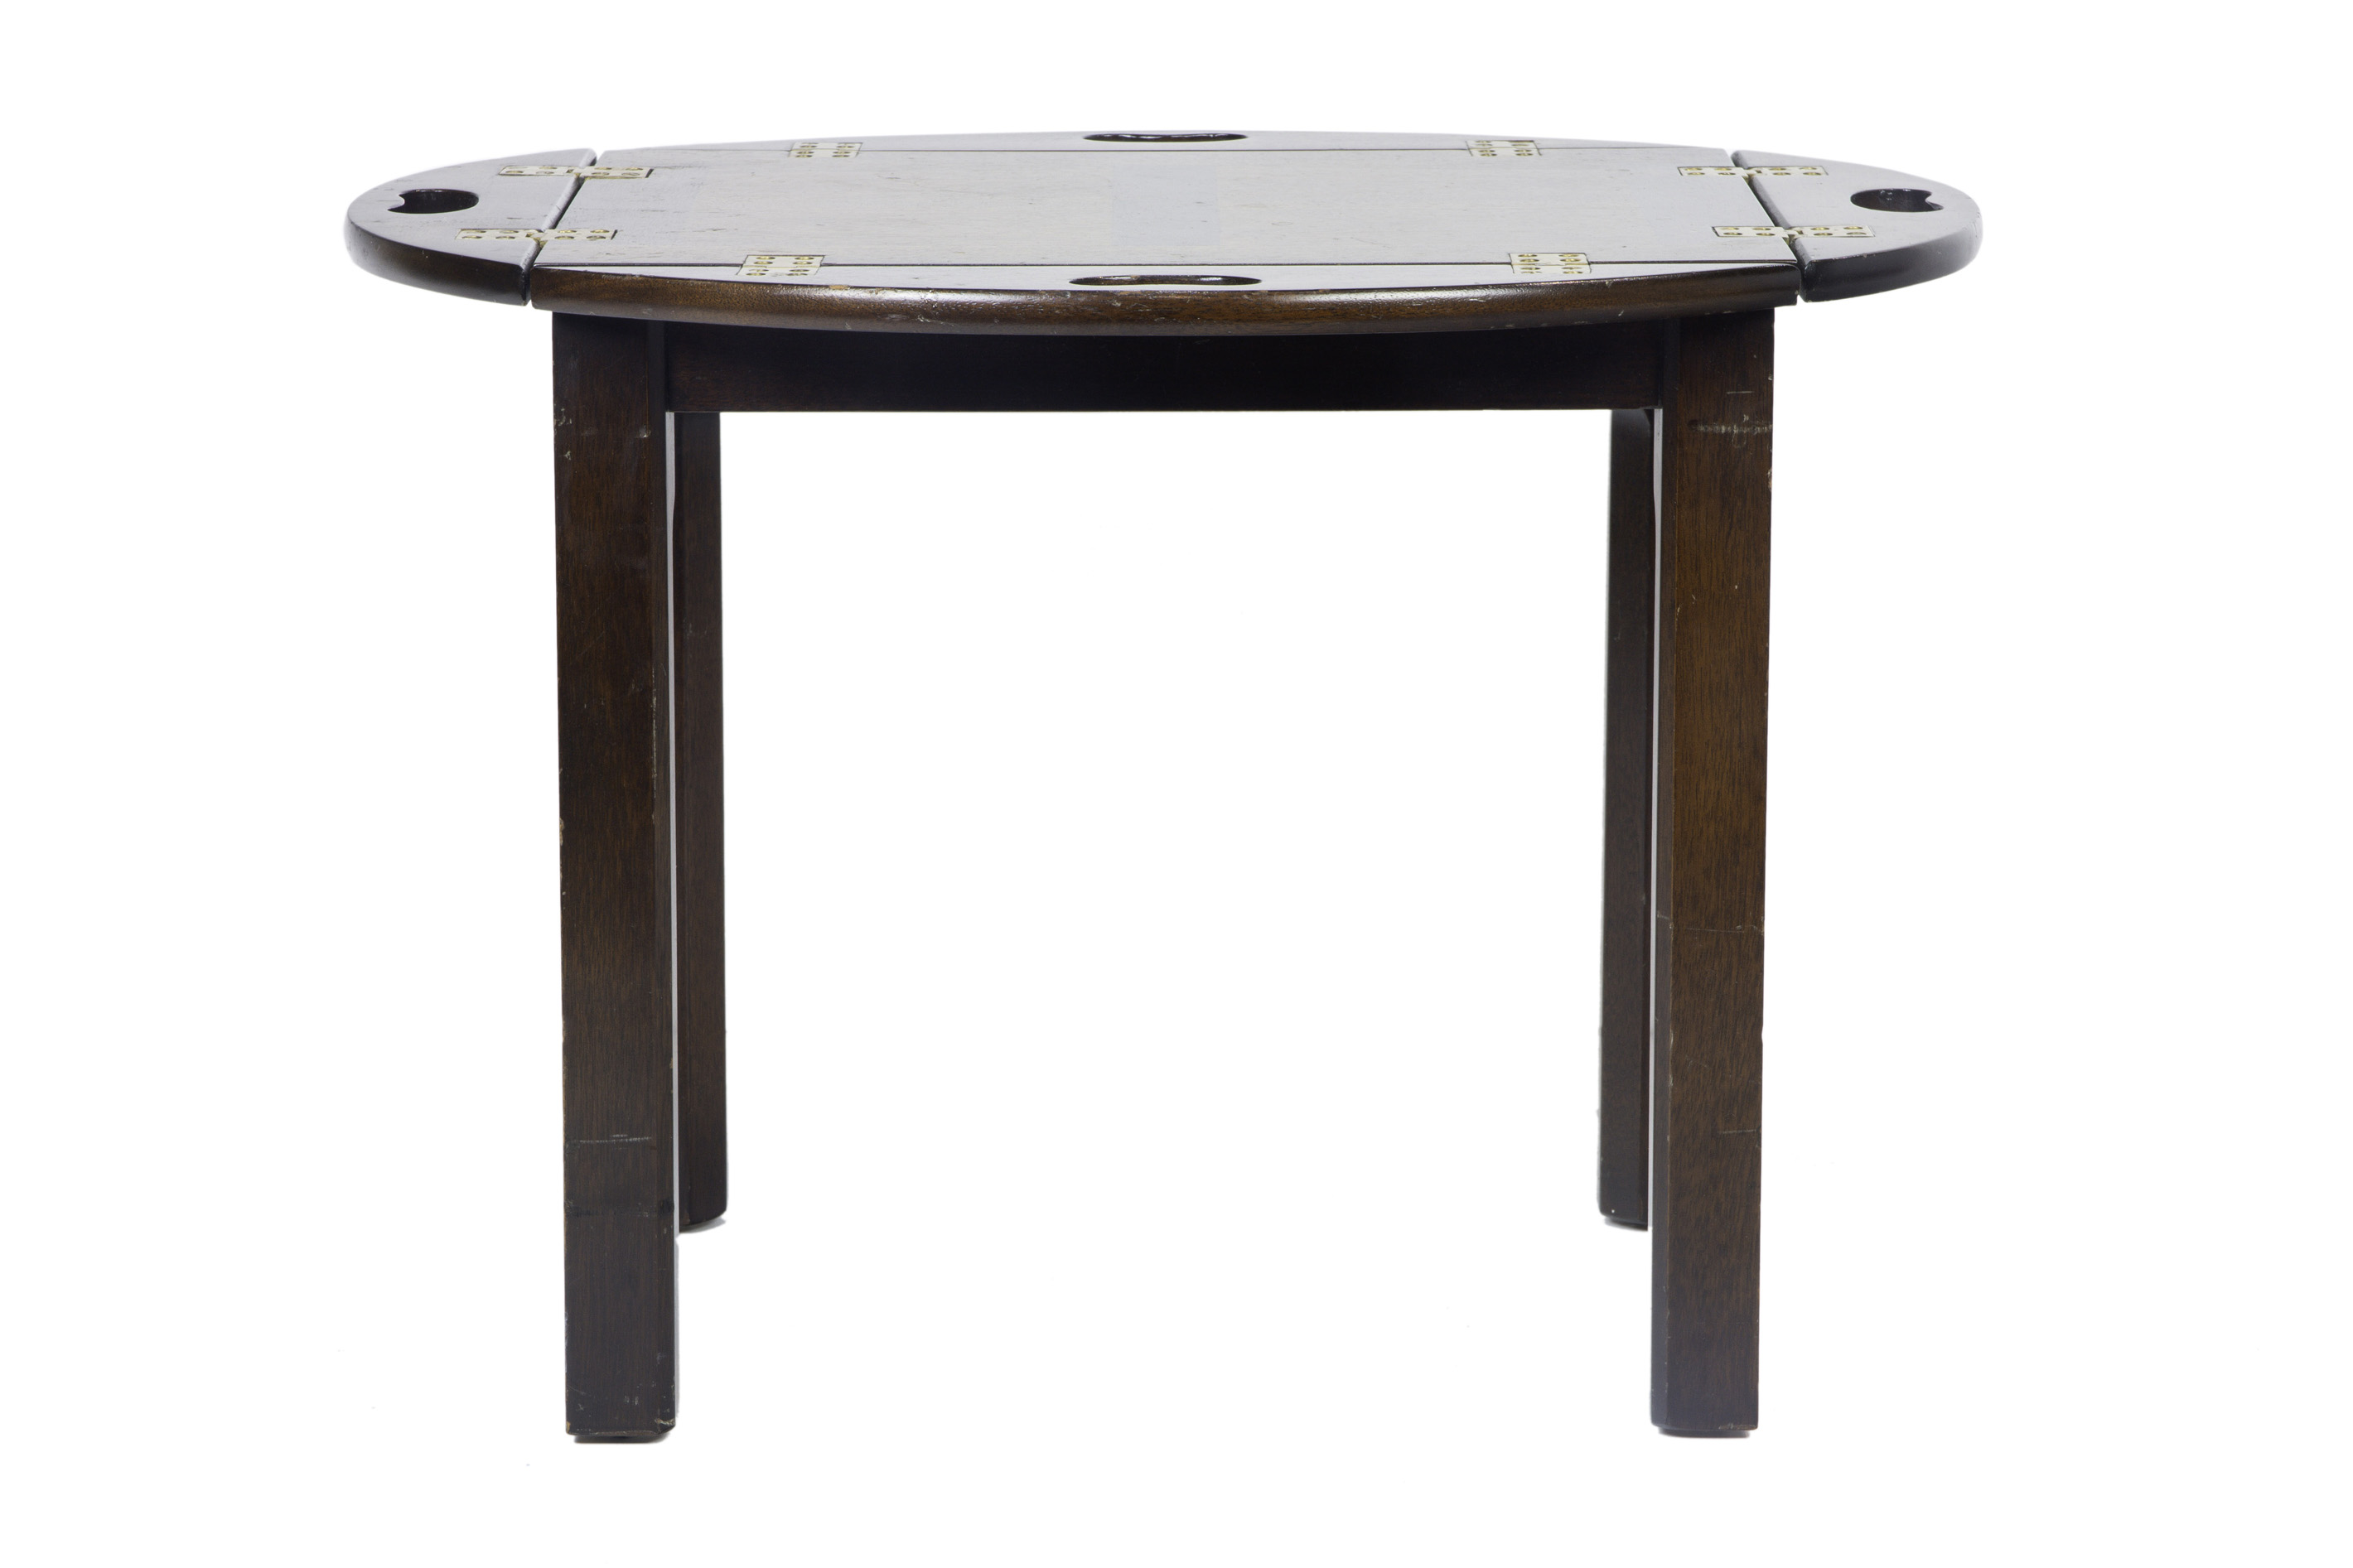 A GEORGIAN STYLE OCCASIONAL TABLE A